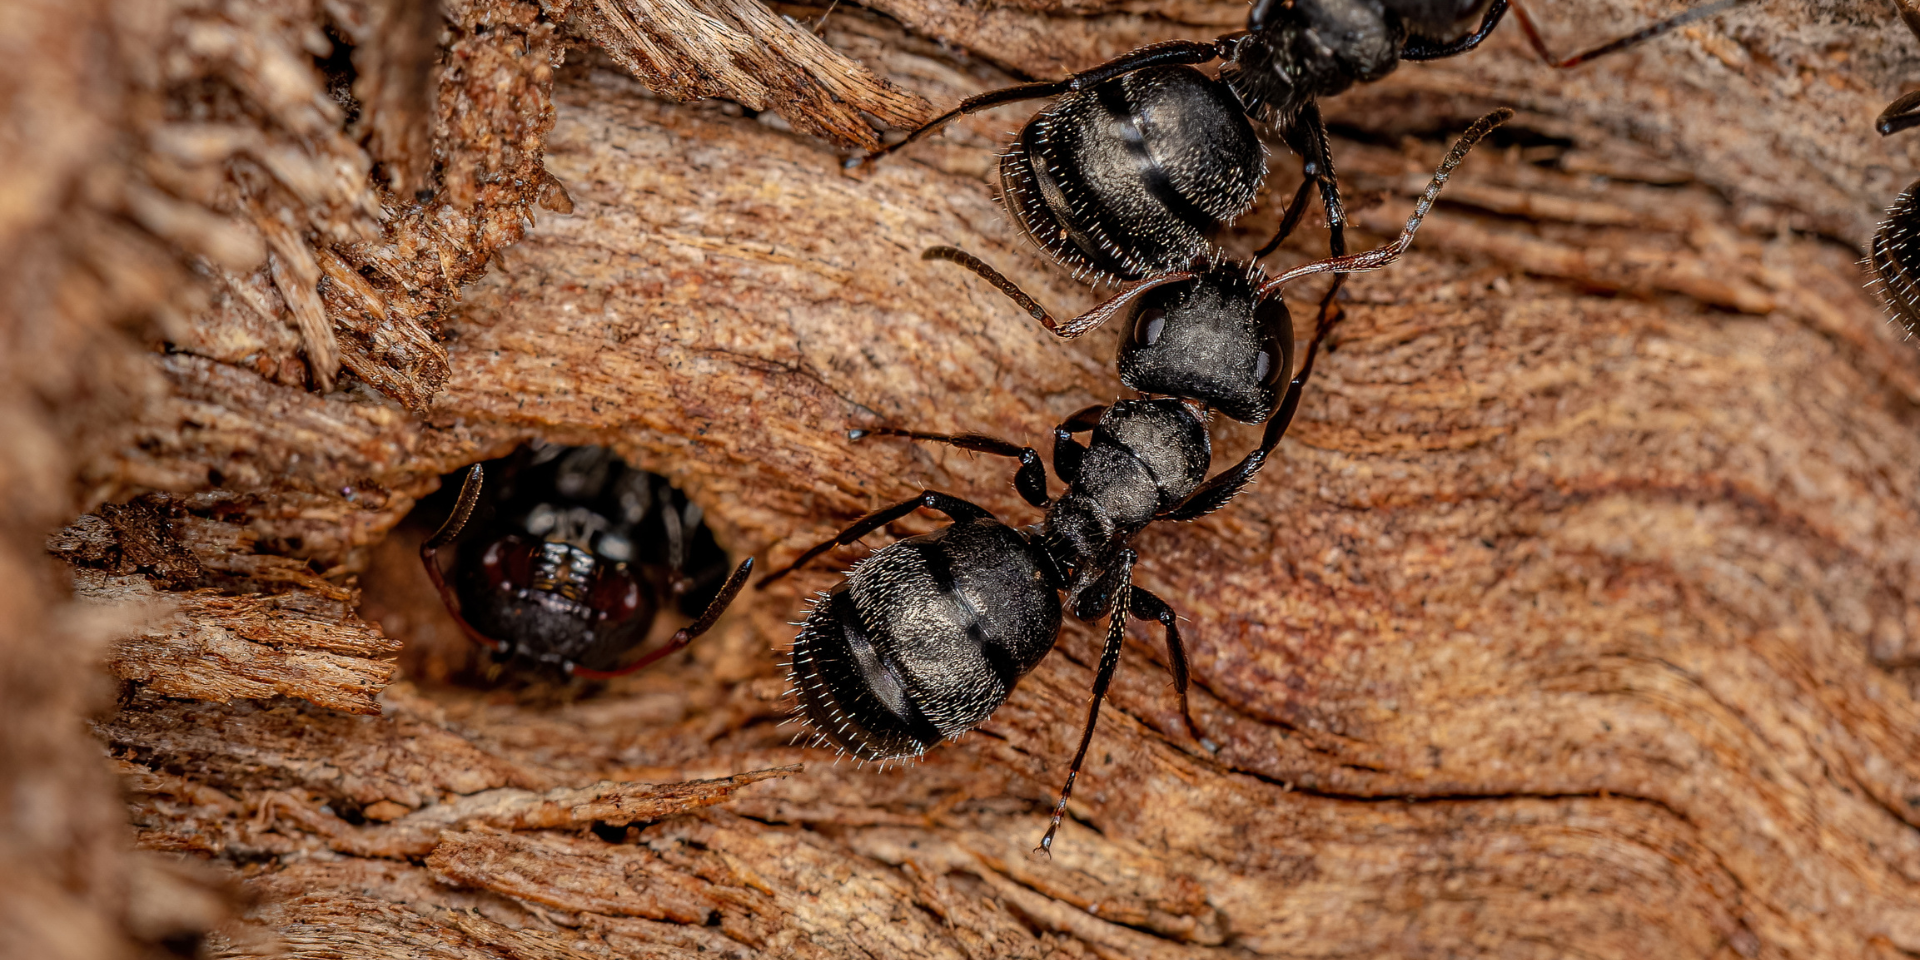 Carpenter and sugar ants are some of the most common types of ants